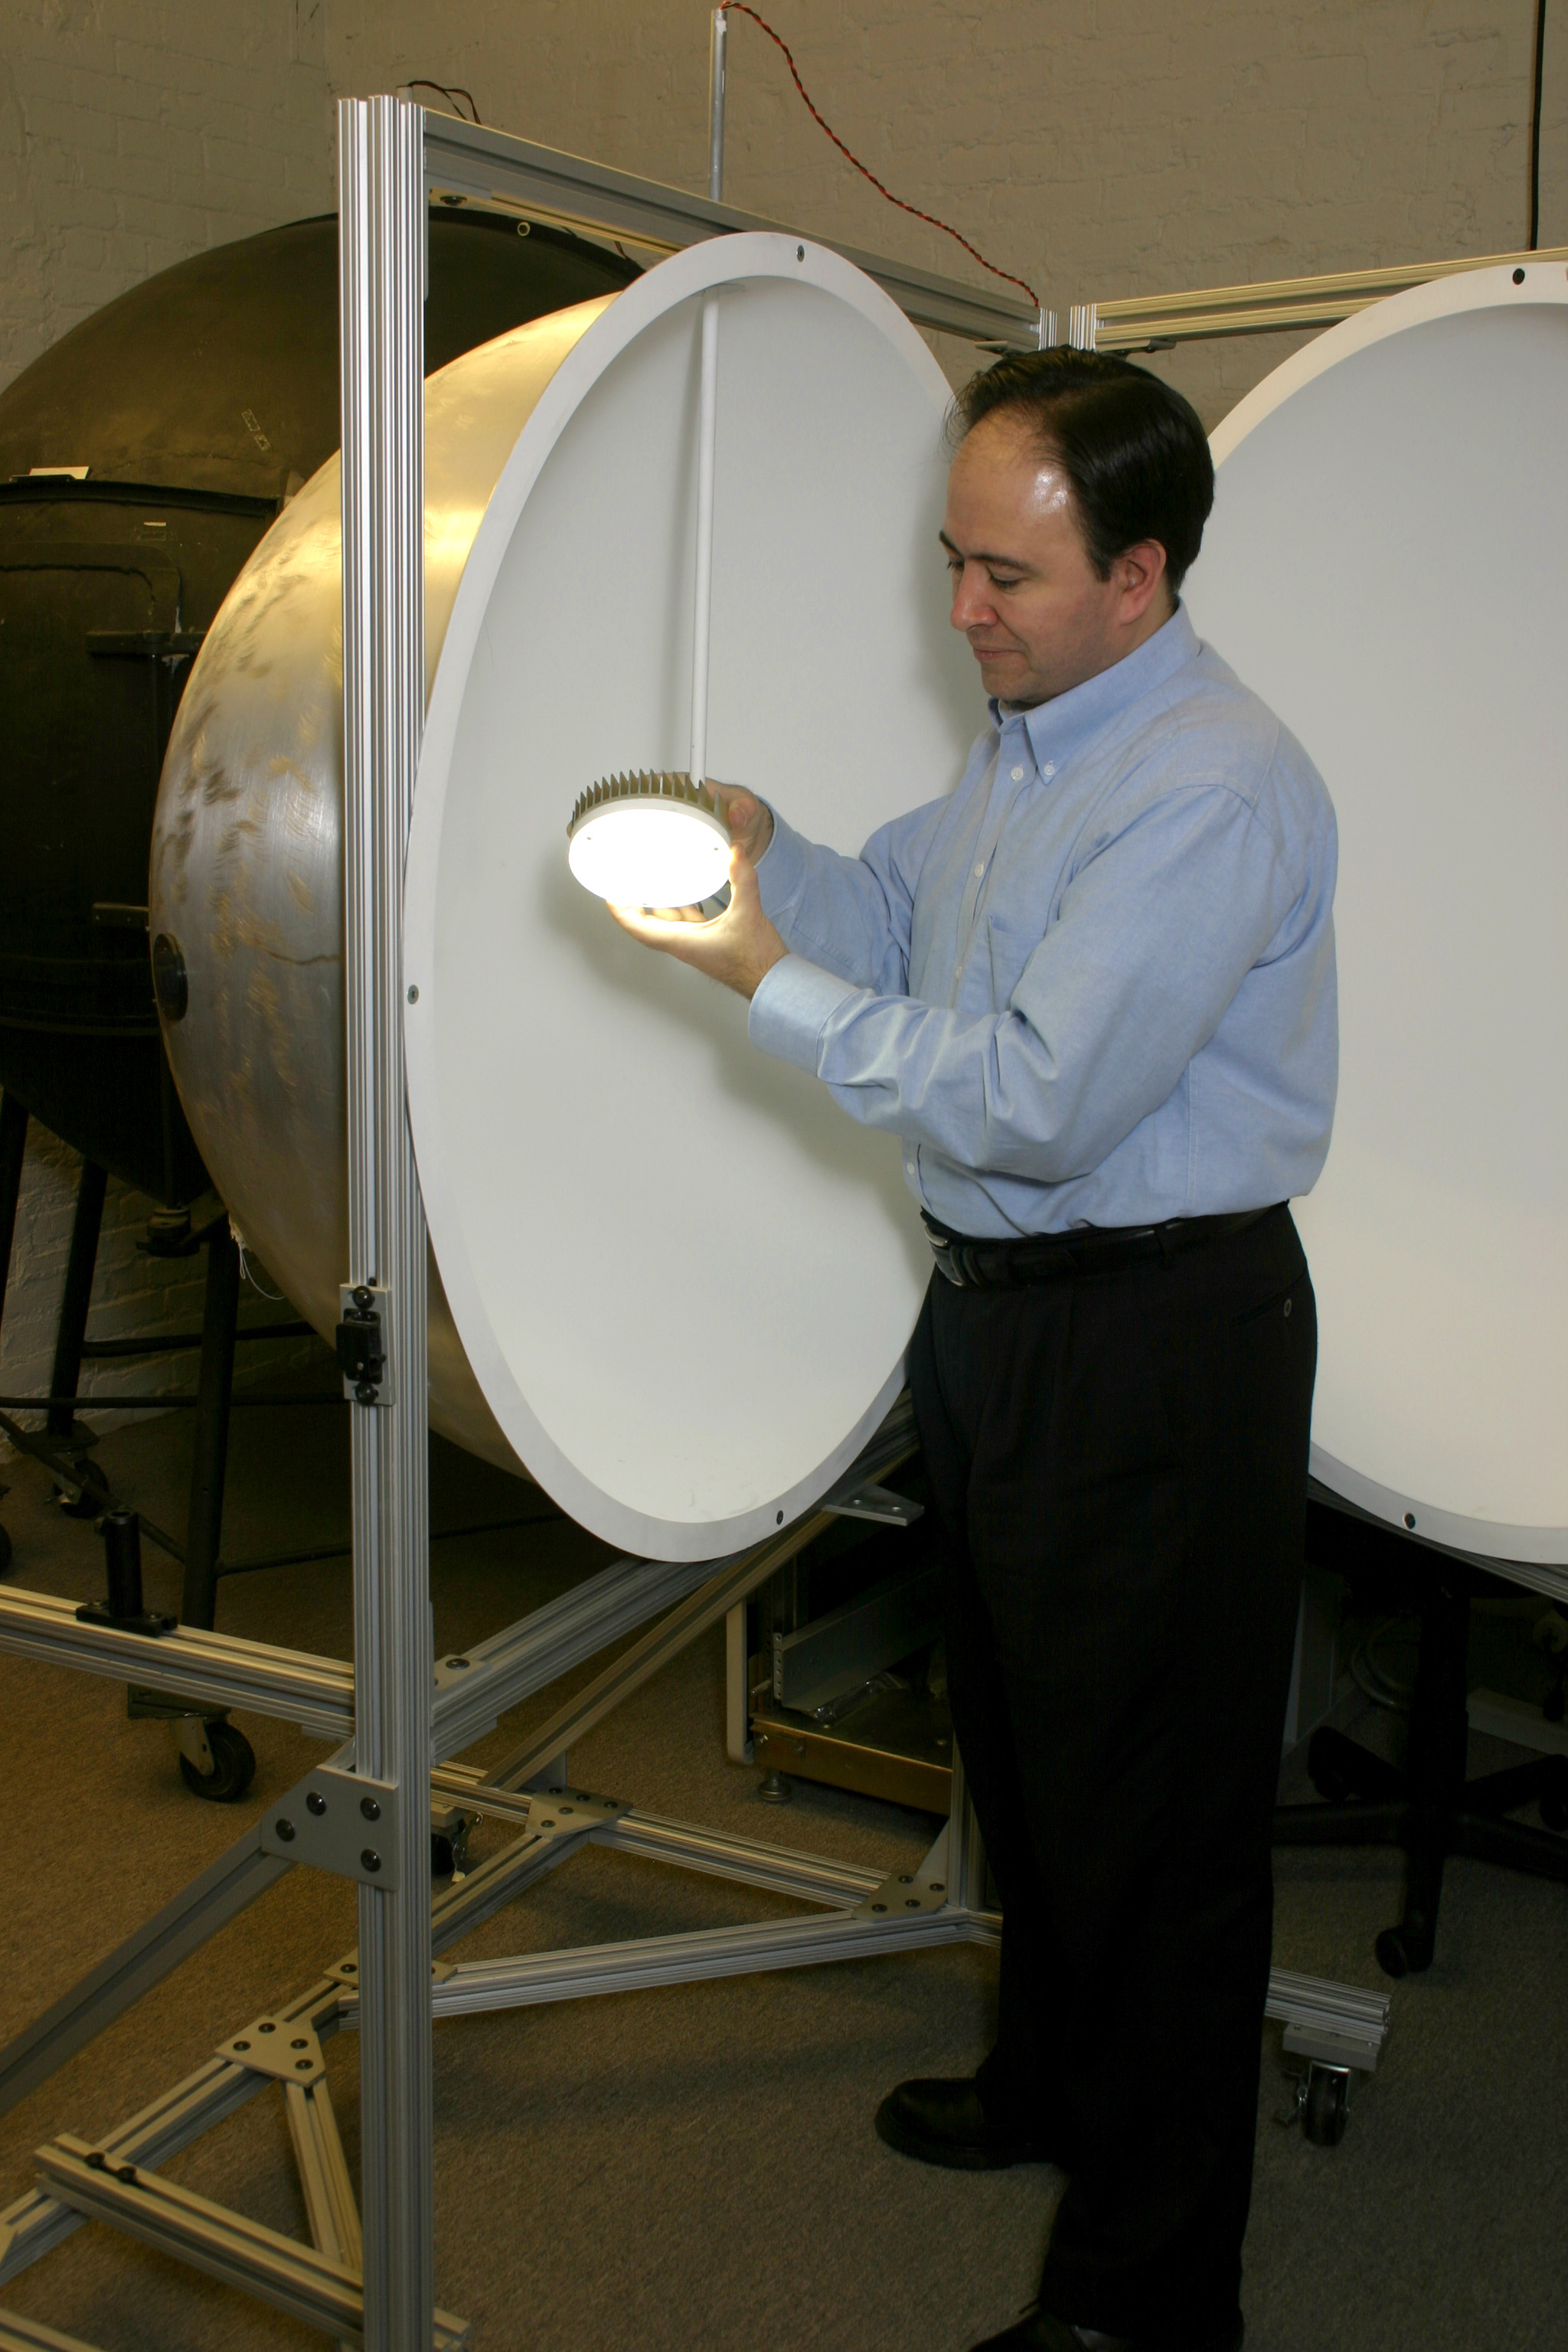 LRC researcher with luminaire and integrating sphere